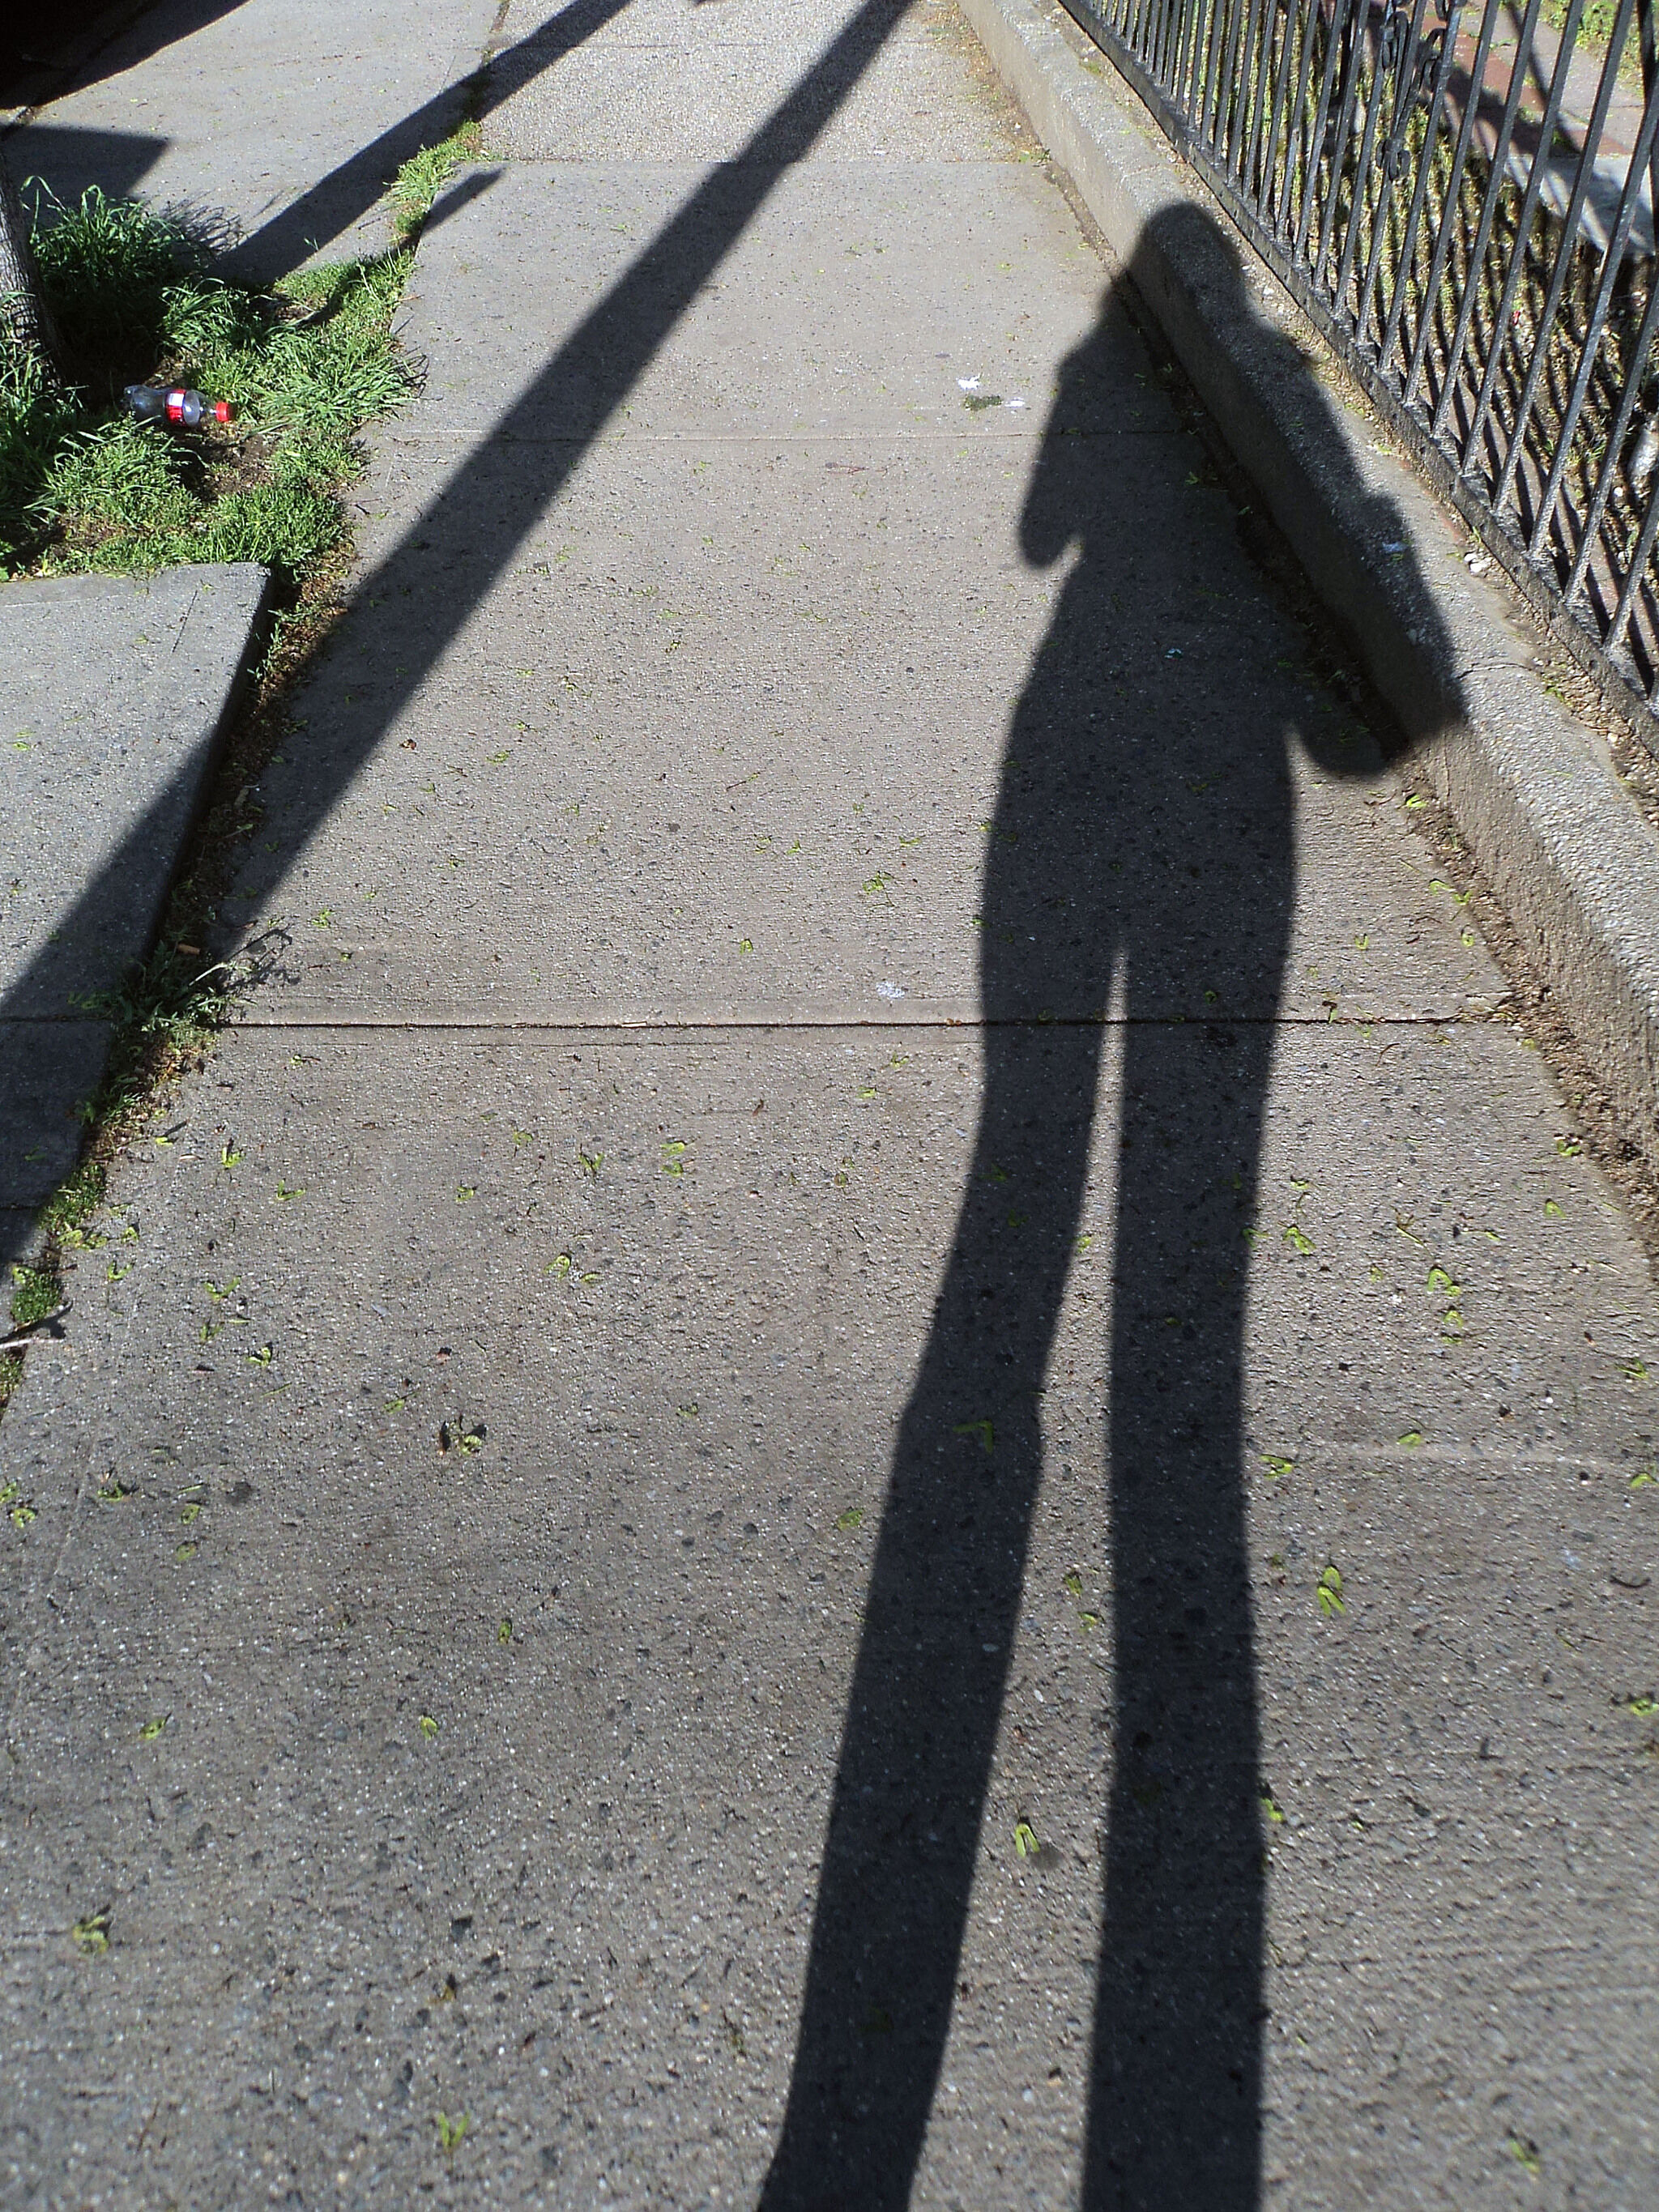 Shadow of a person on a sunlit sidewalk next to a metal fence and a patch of grass.